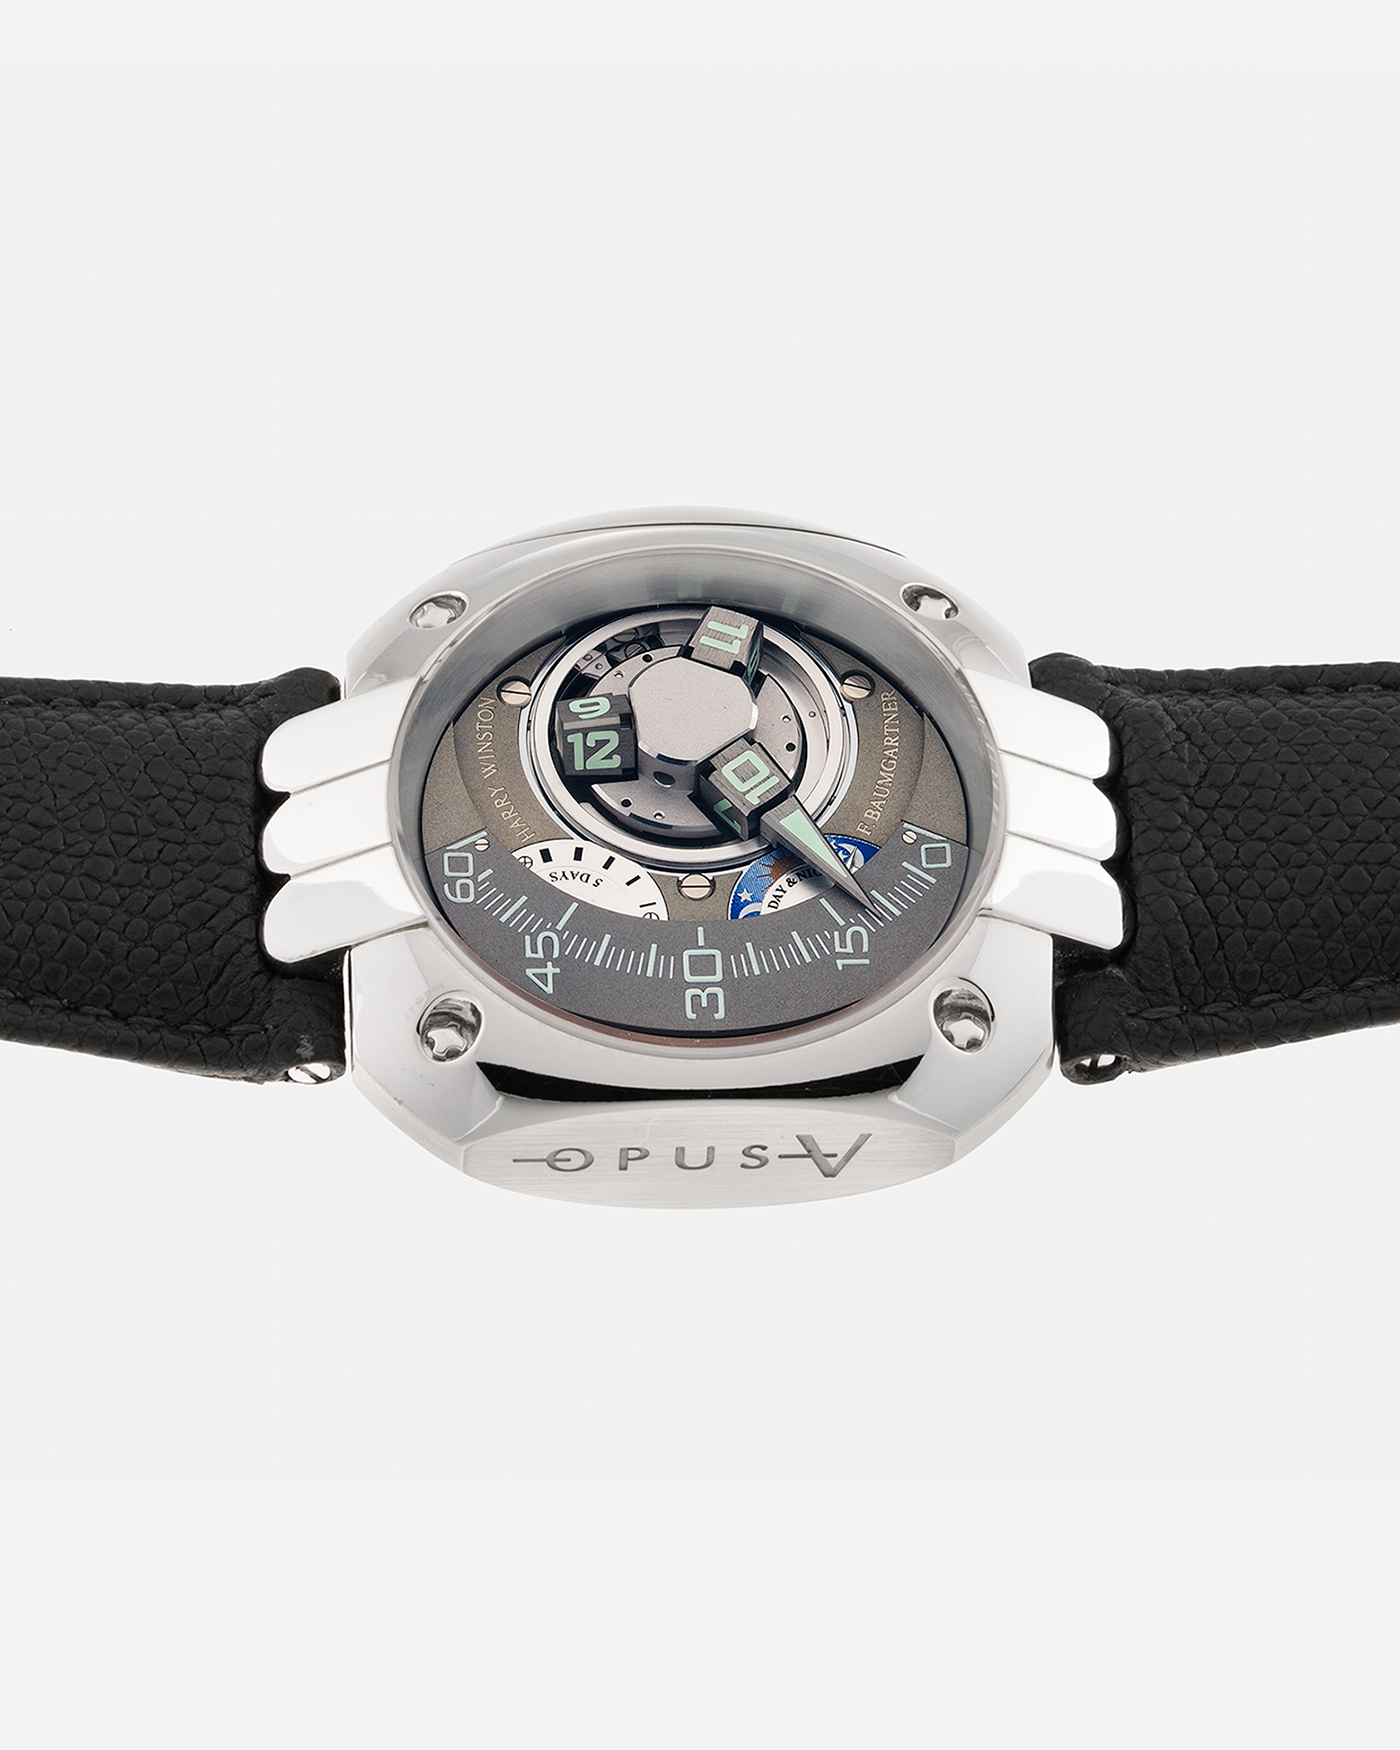 Brand: Harry Winston Year: 2005 Model: Opus V, Limited Edition of 45 pieces in Platinum Material: Platinum 950 Movement: Harry Winston Cal. HW1026 in ARCAP Alloy, Manual-Winding Case Diameter: 50mm Strap: Philips Grey Calf Leather Strap with Signed Platinum Tang Buckle